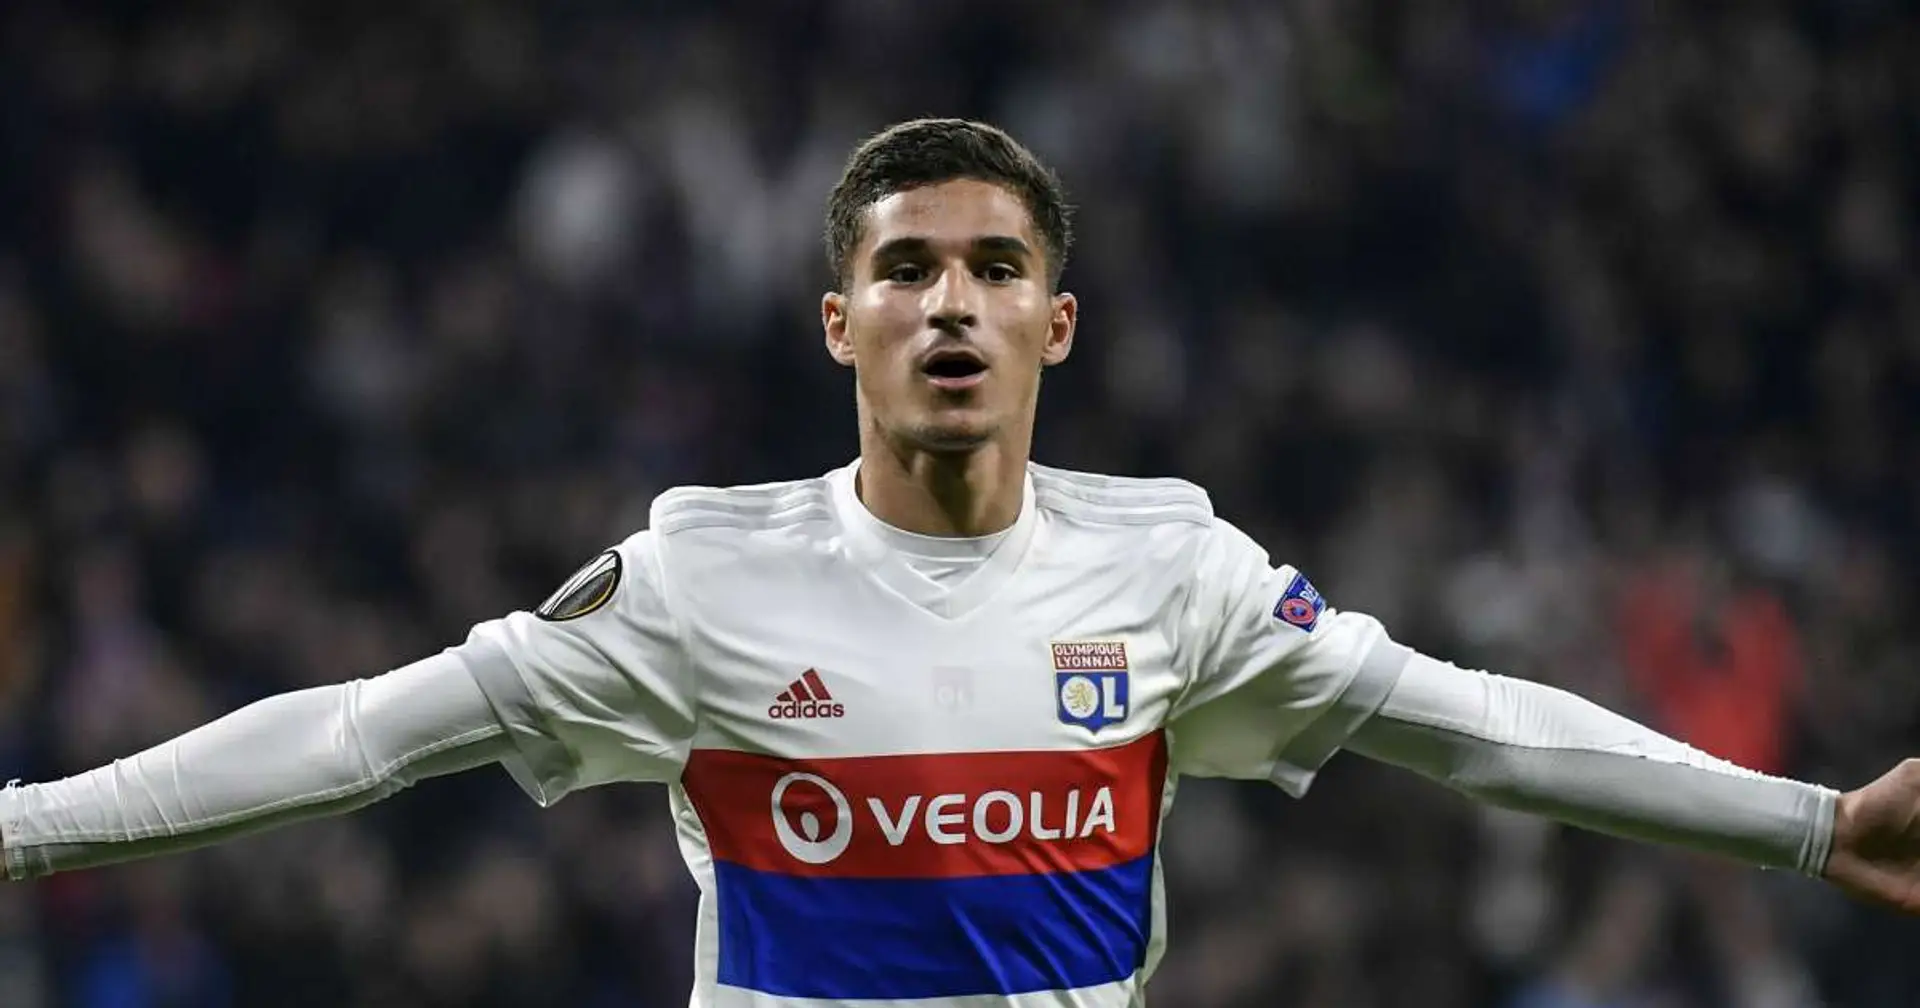 Arsenal reportedly face transfer fight with 5 other top teams for £65m-rated Lyon starlet Aouar praised by Guardiola